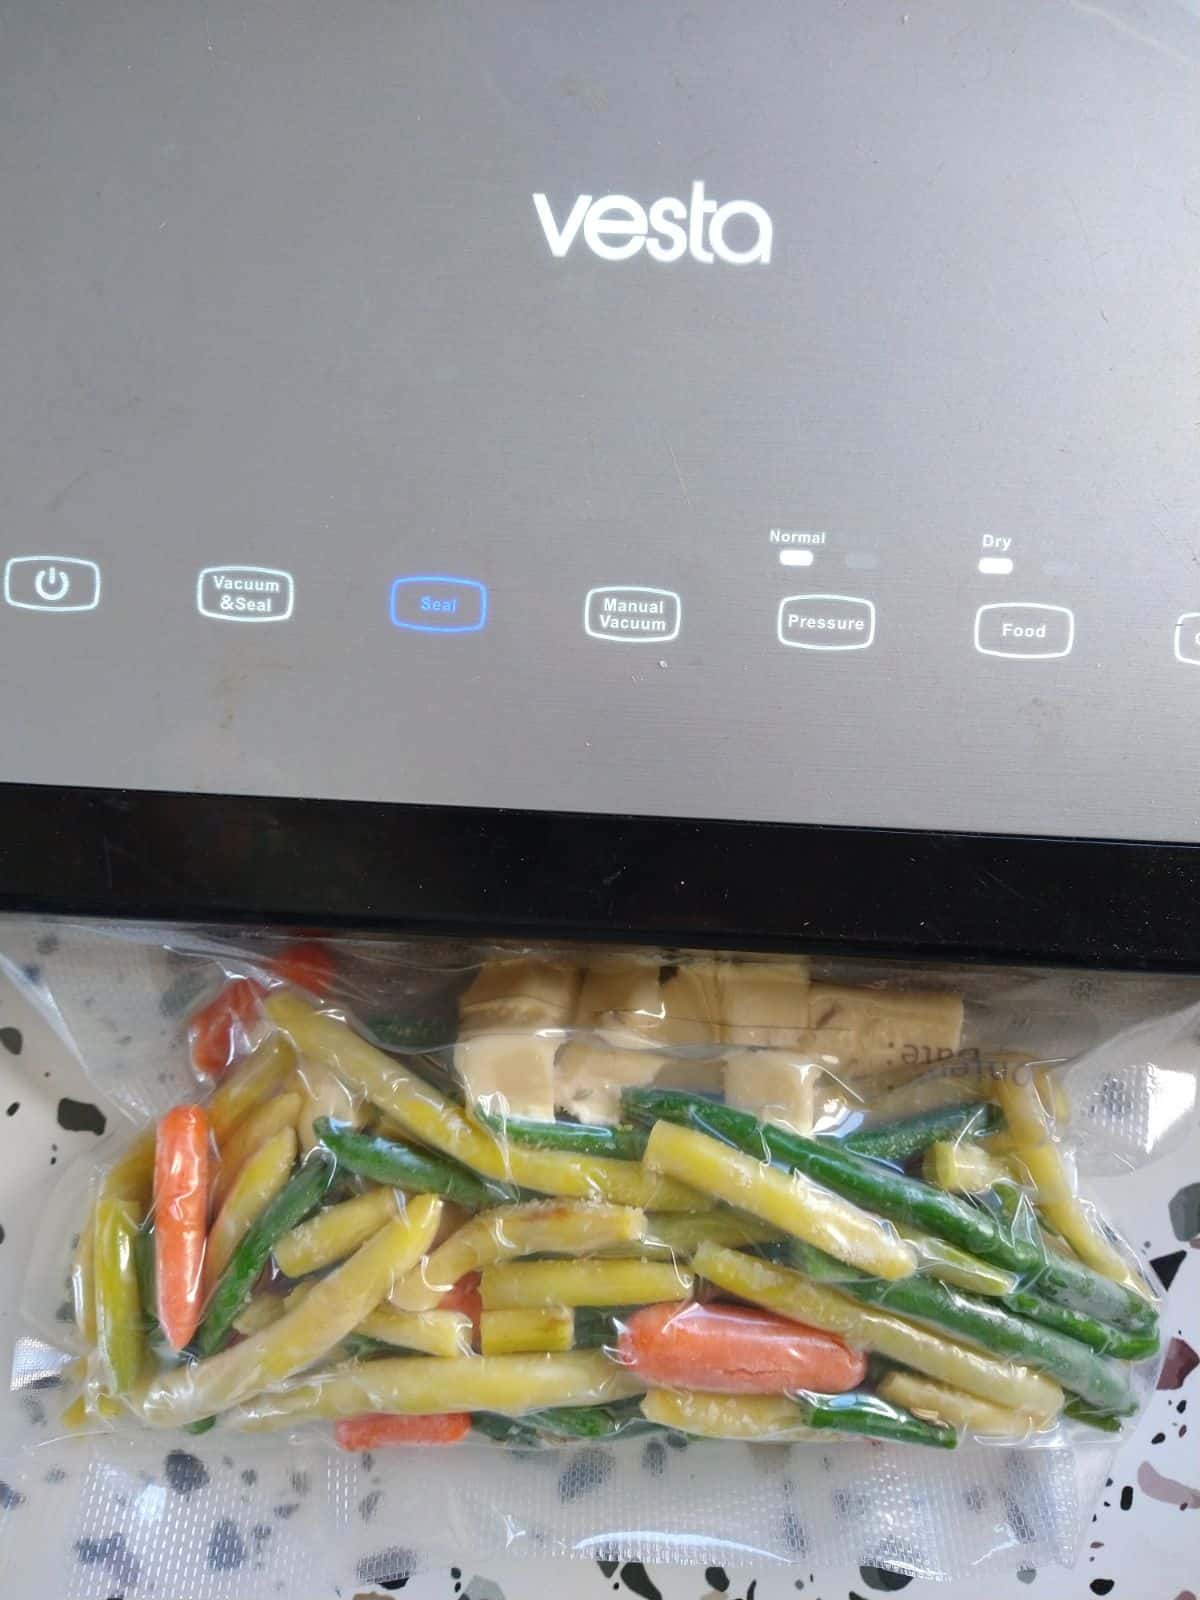 A Vesta vacuum sealer sealing a bag of baby carrots, green beans, and wax beans with butter at the top of the bag.